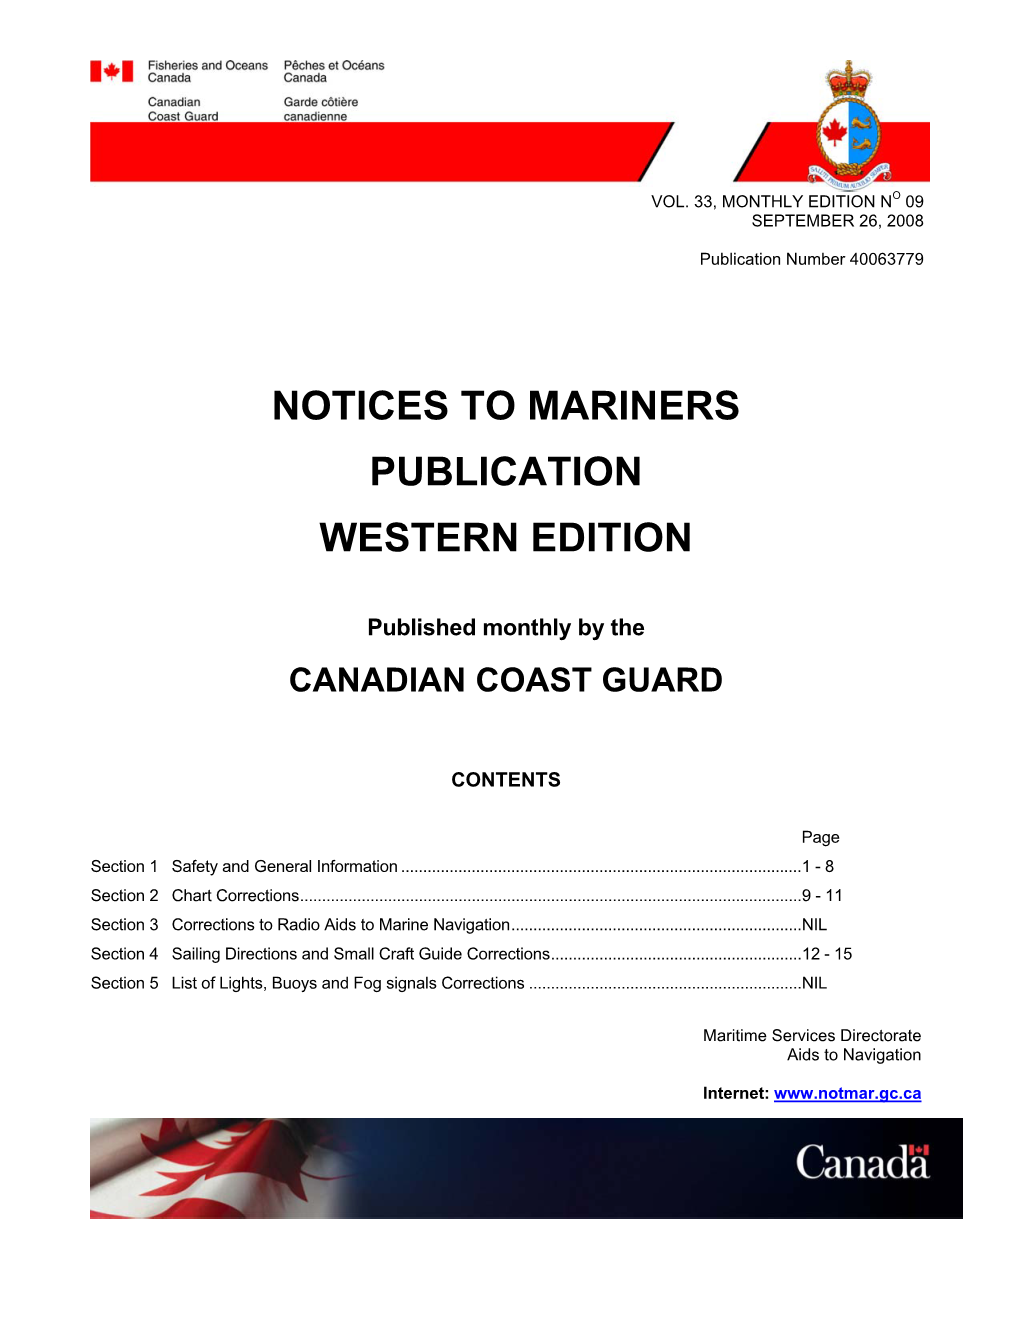 Notices to Mariners Publication Western Edition